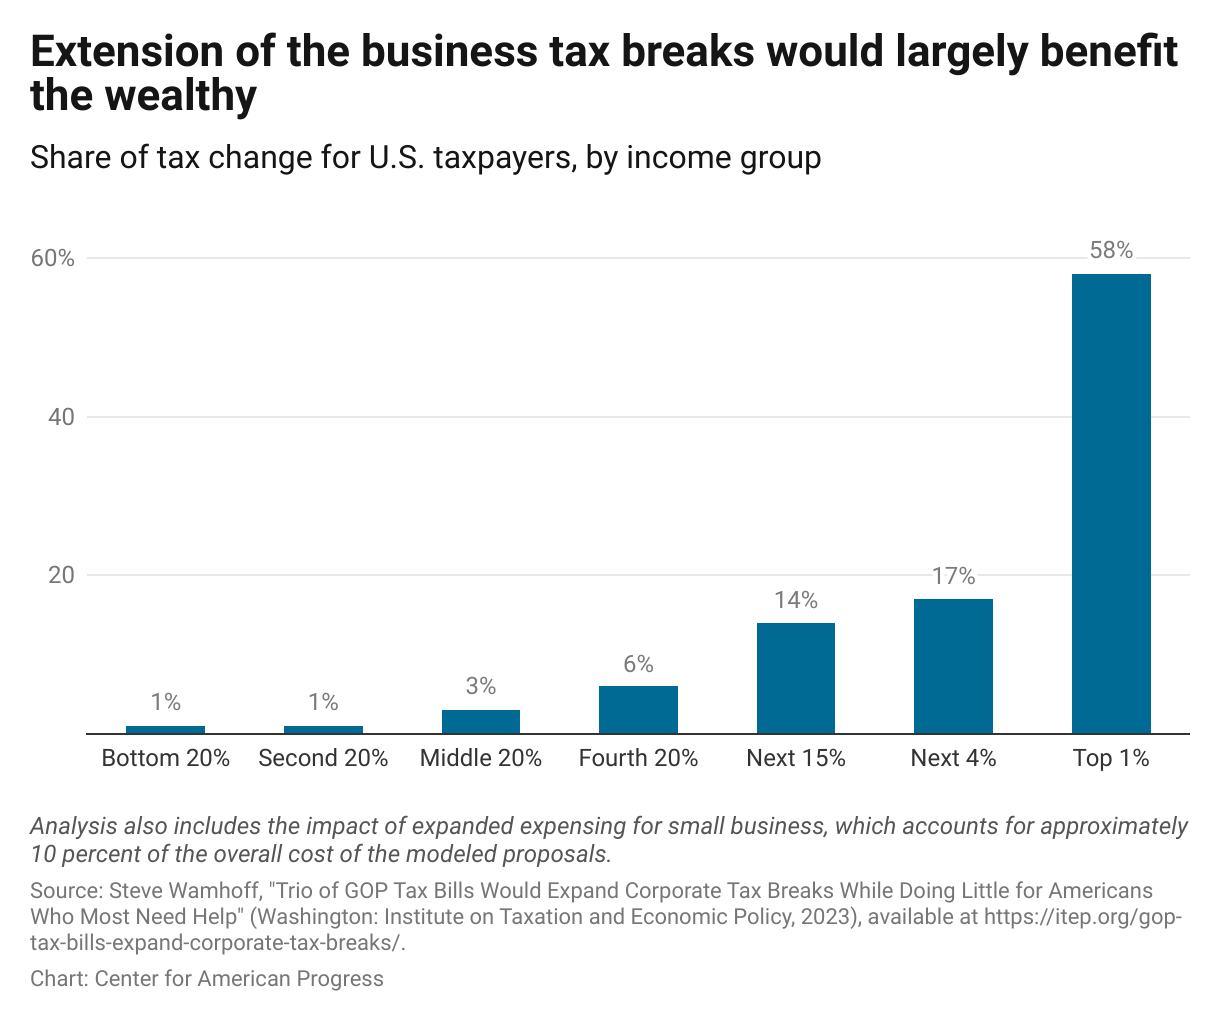 A bar chart showing the share of business tax breaks by various income groups for U.S. taxpayers, with the top 1 percent getting 58 percent of the tax change for U.S. taxpayers.